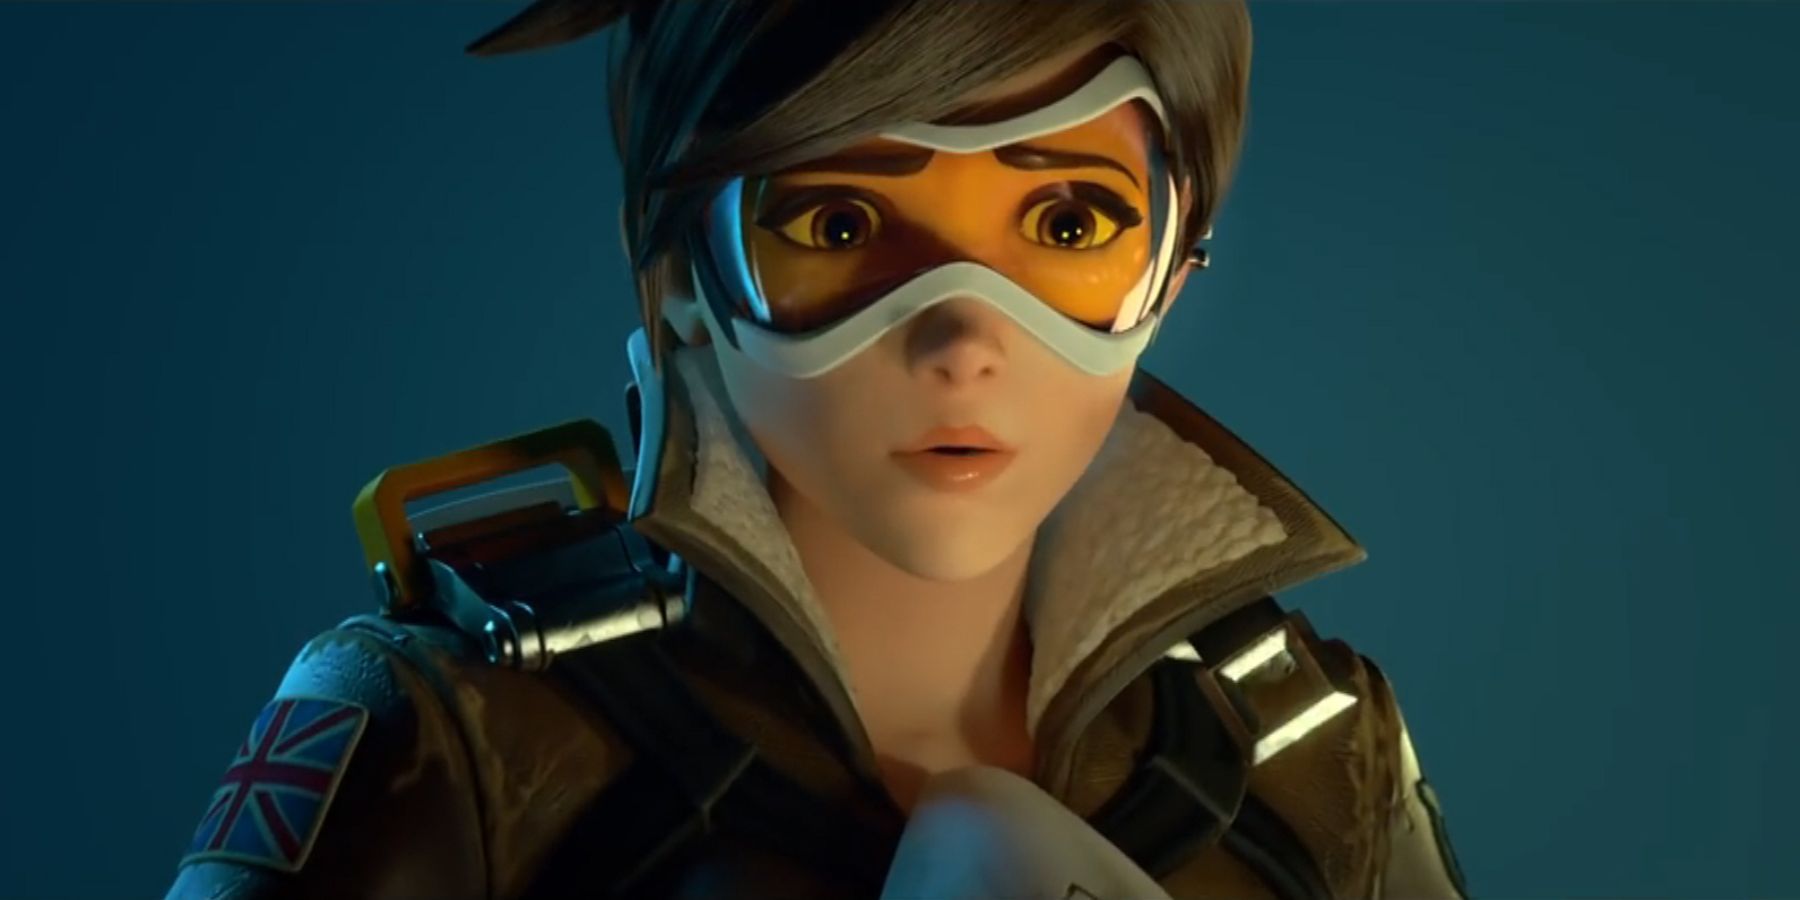 Warn on X: POV: You're now the #1 Tracer in Overwatch 2